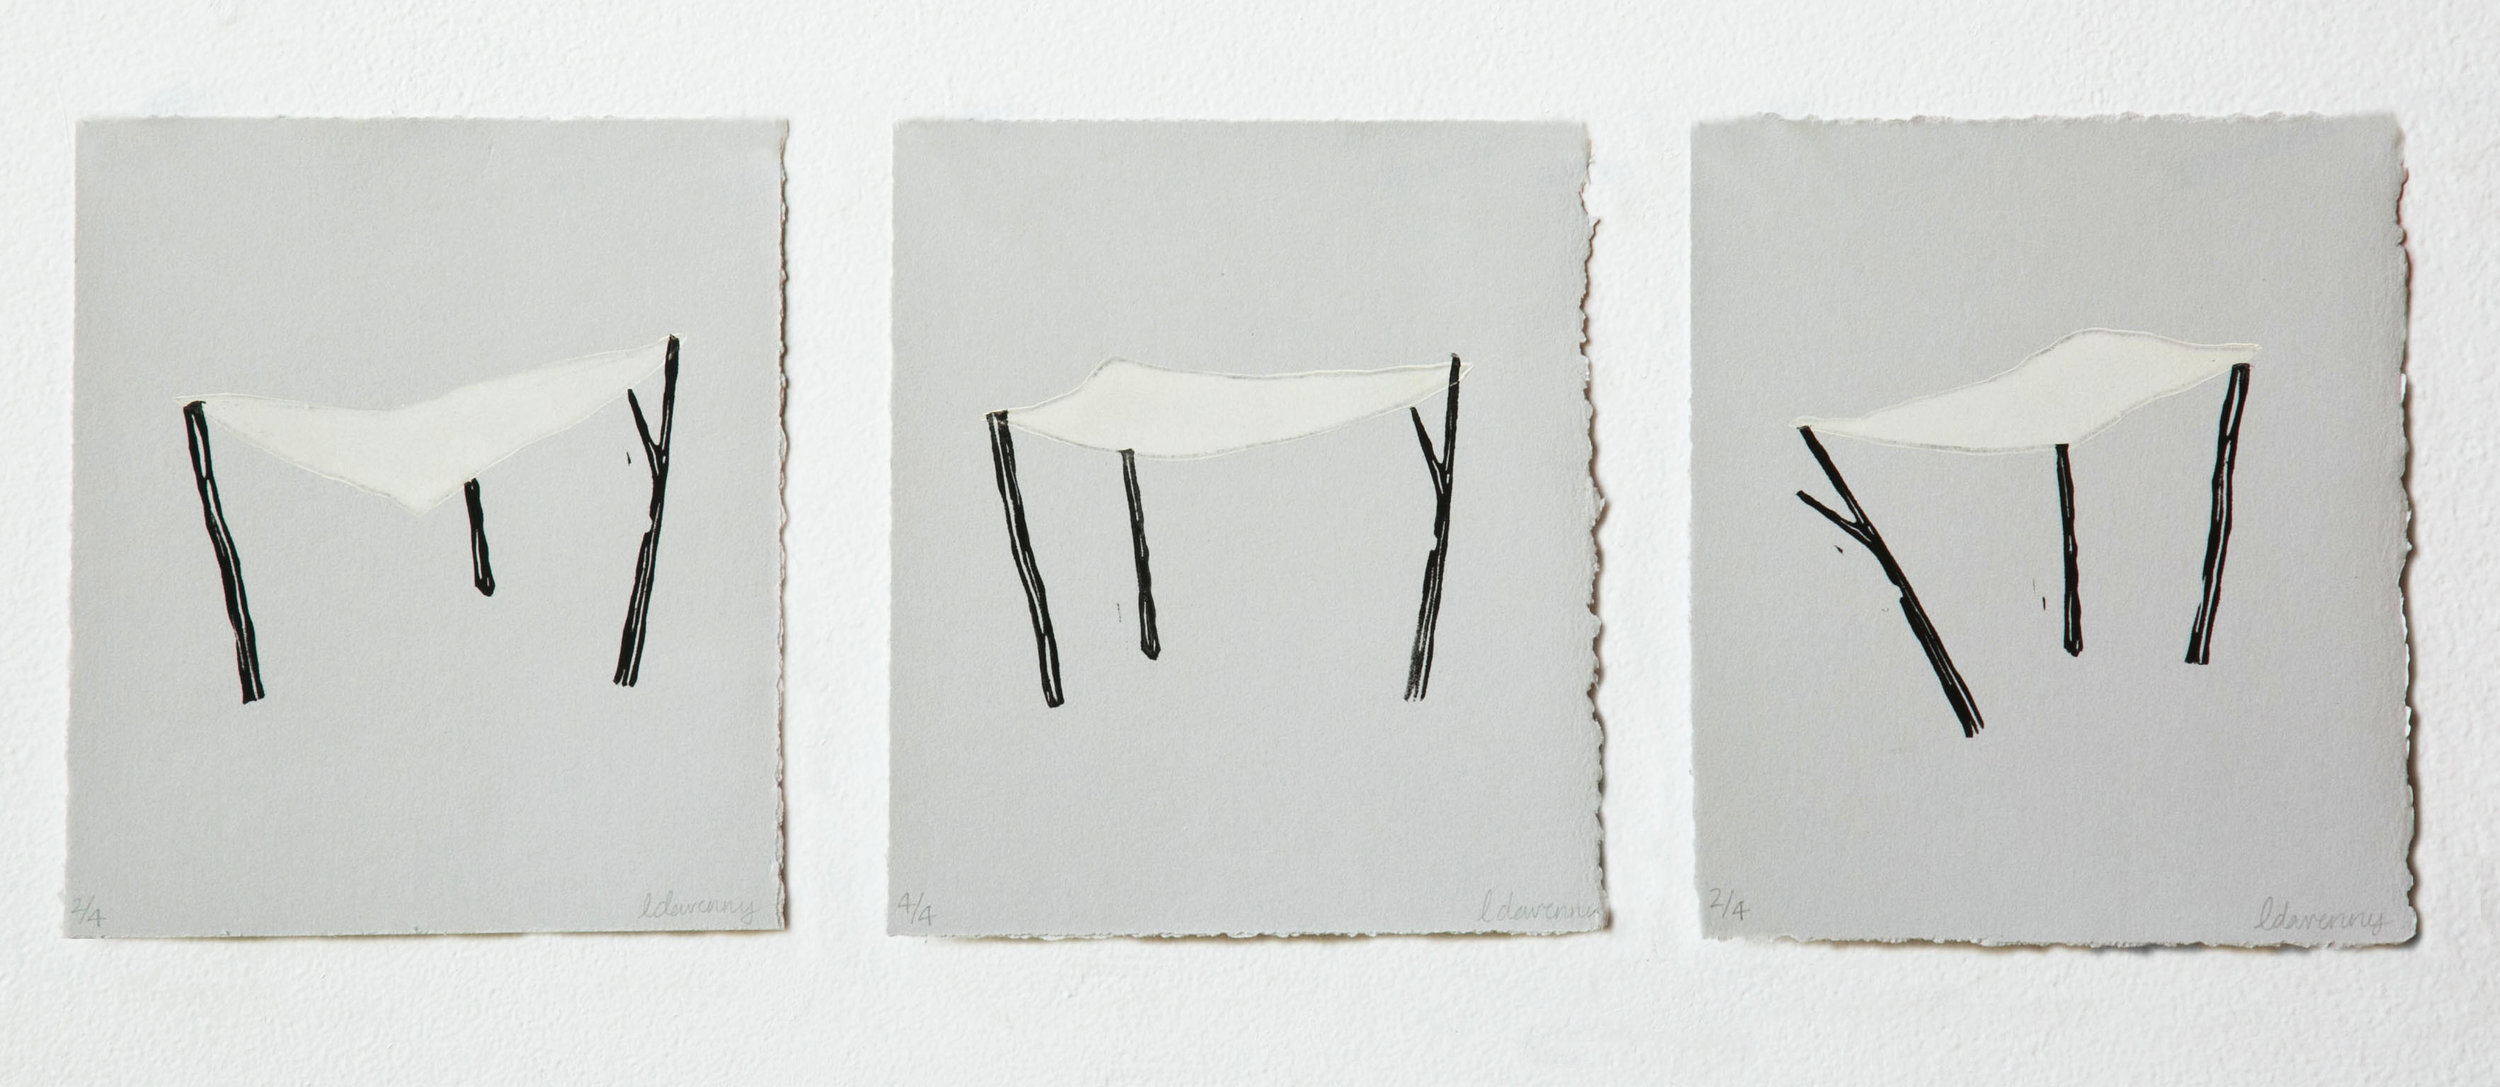   a place to stay dry    triptych relief monoprint,  2019  6 x 7 in. 